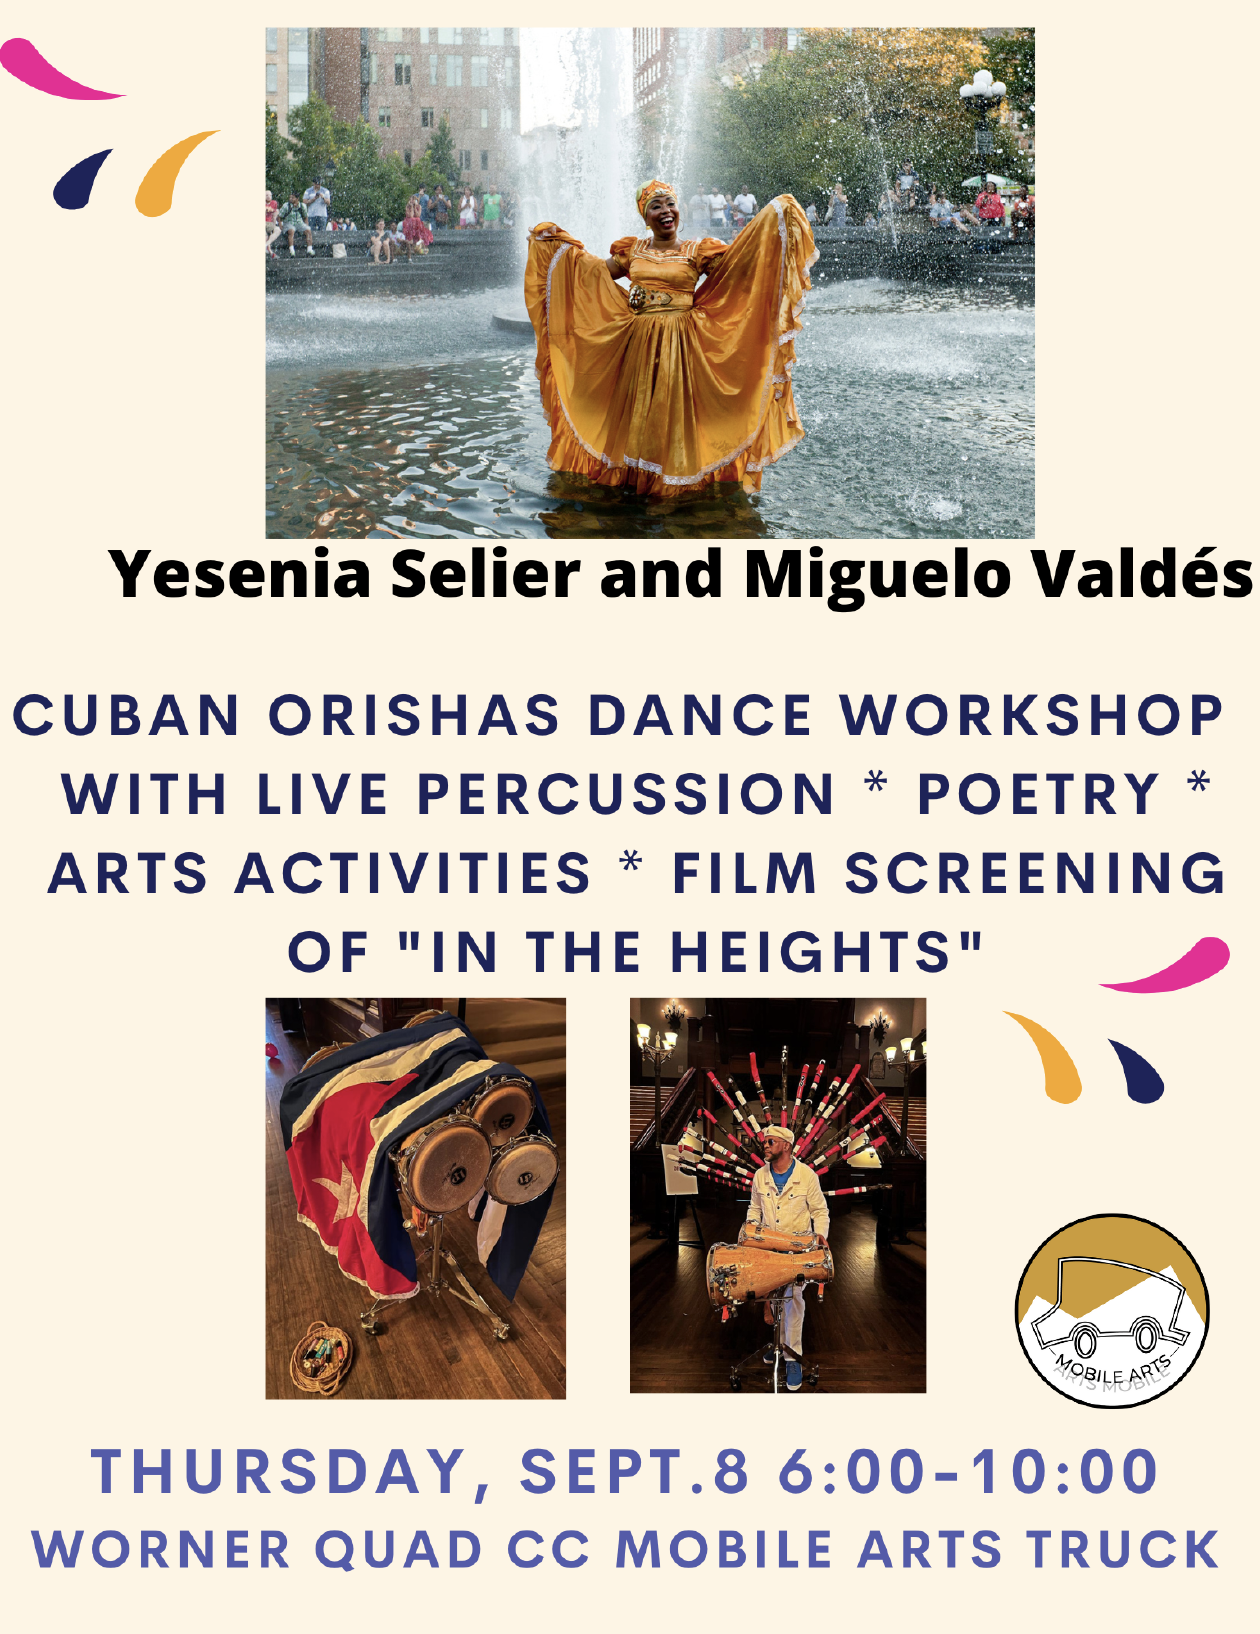 Yesenia Selier and Miguelo Valdes  CUBAN ORISHAS DANCE WORKSHOP  WITH LIVE PERCUSSION * POETRY * ARTS ACTIVITIES* FILM SCREENING OF "IN THE HEIGHTS" THURSDAY, SEPT.8 6:00-10:00 WORNER QUAD CC MOBILE ARTS TRUCK 